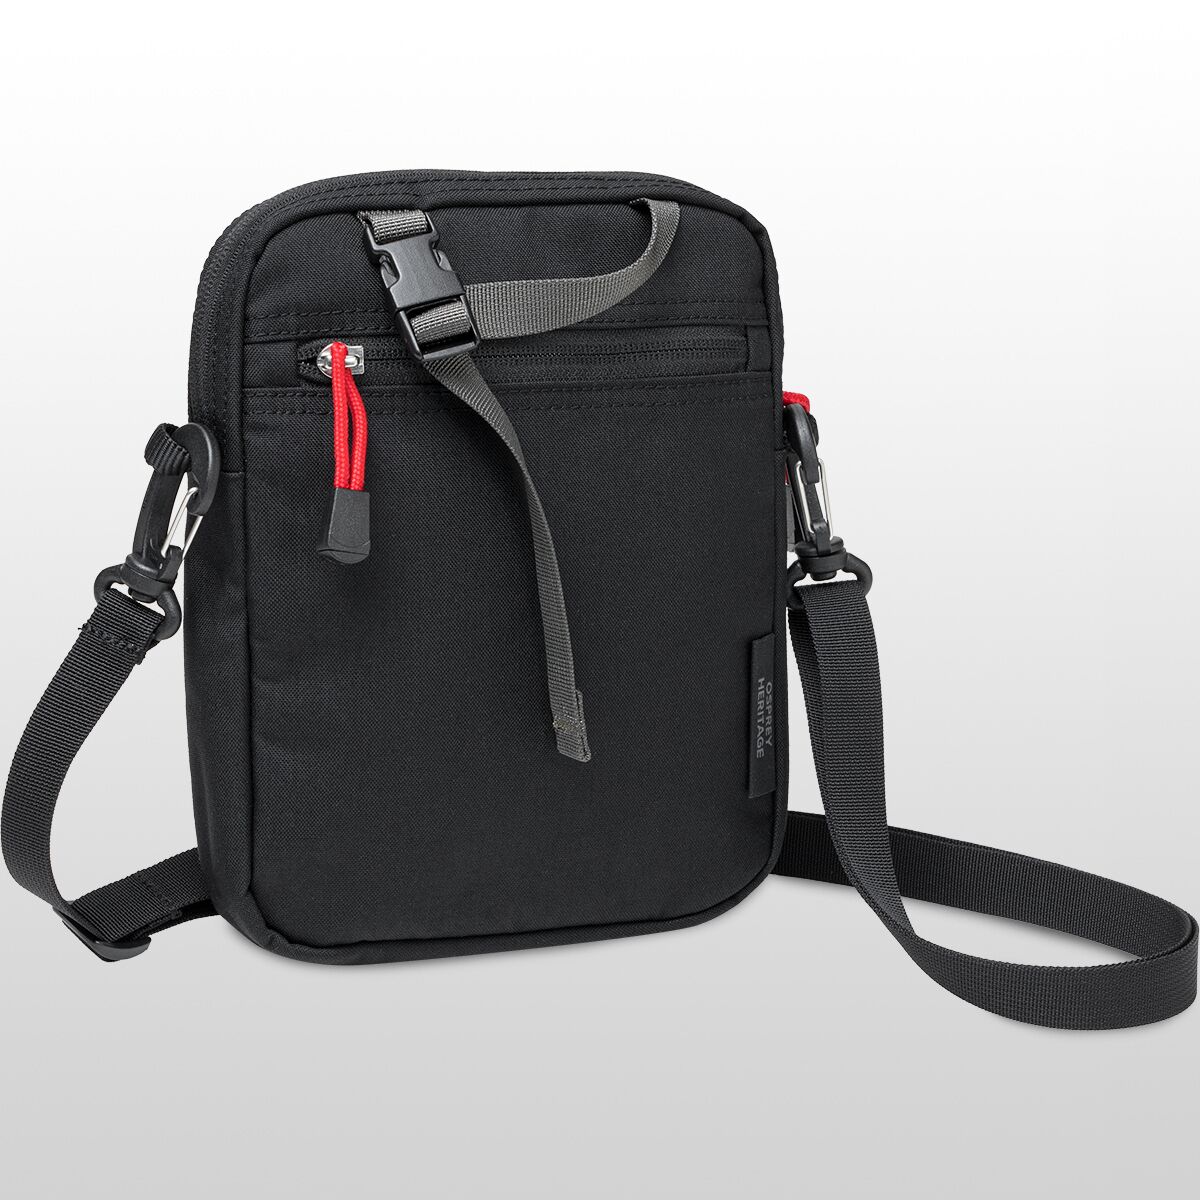 Osprey Packs Heritage Musette 2 - Accessories